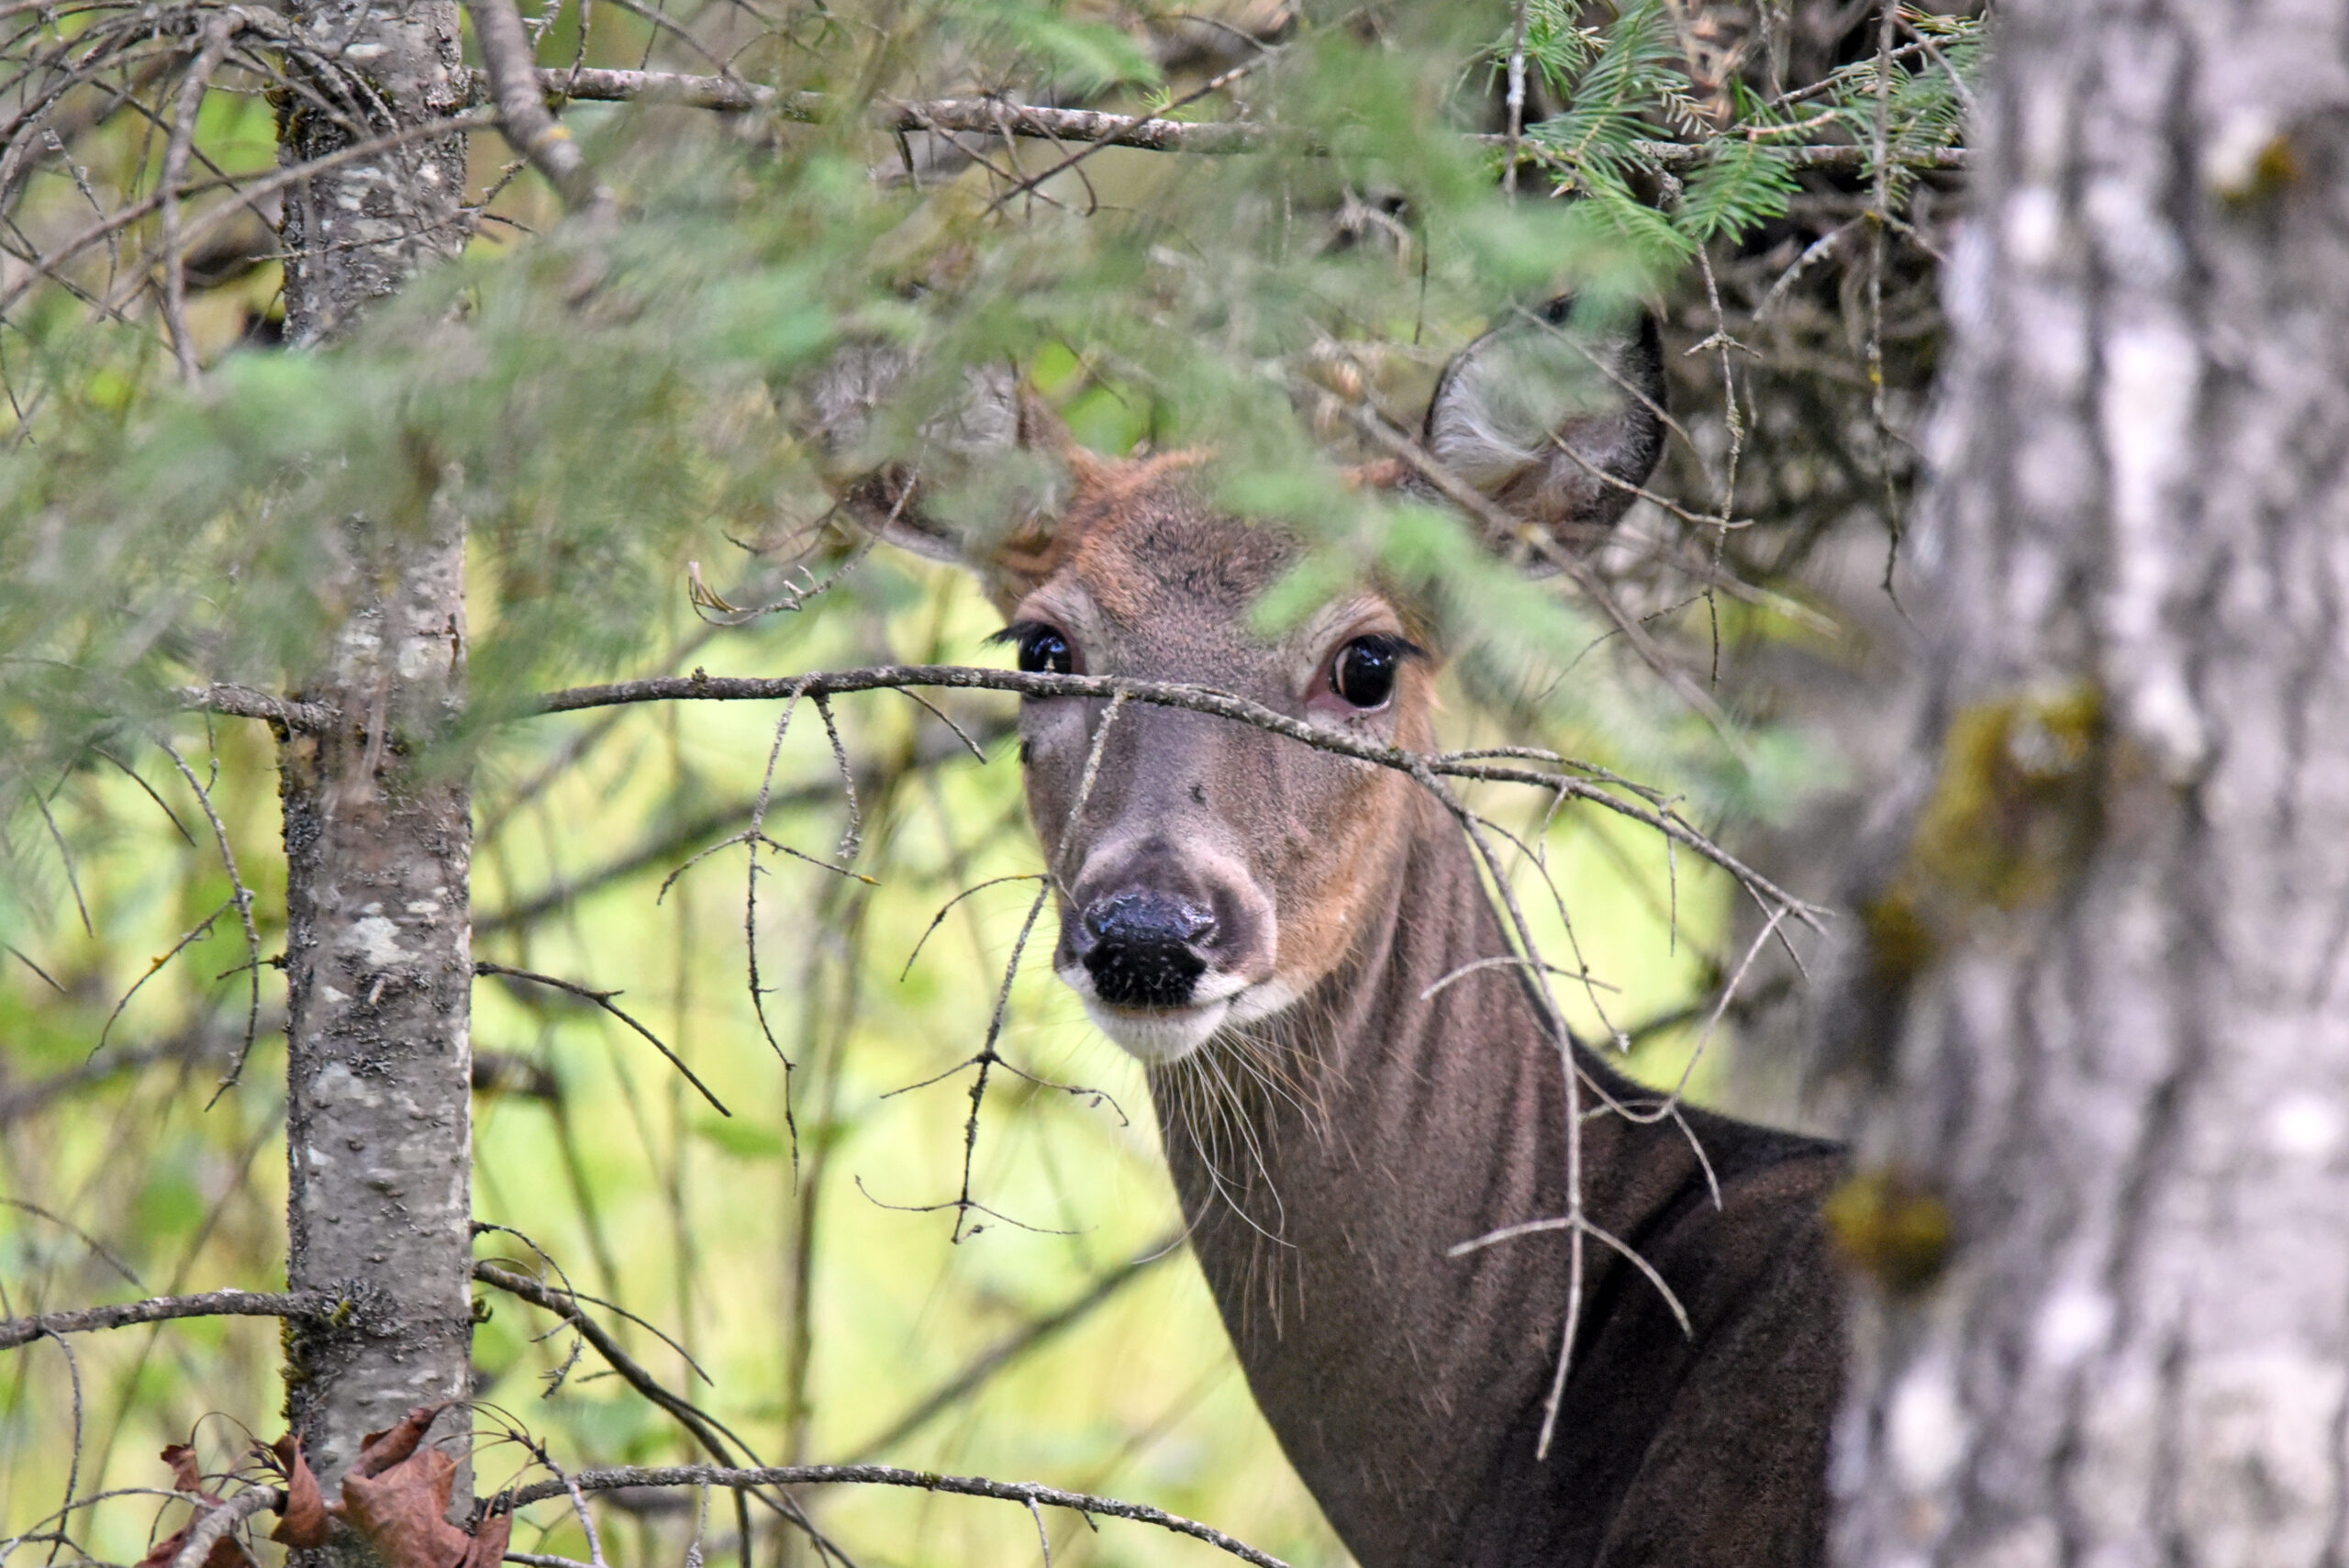 Deer hunting could be legal on Sundays in Maine if this lawsuit is successful.